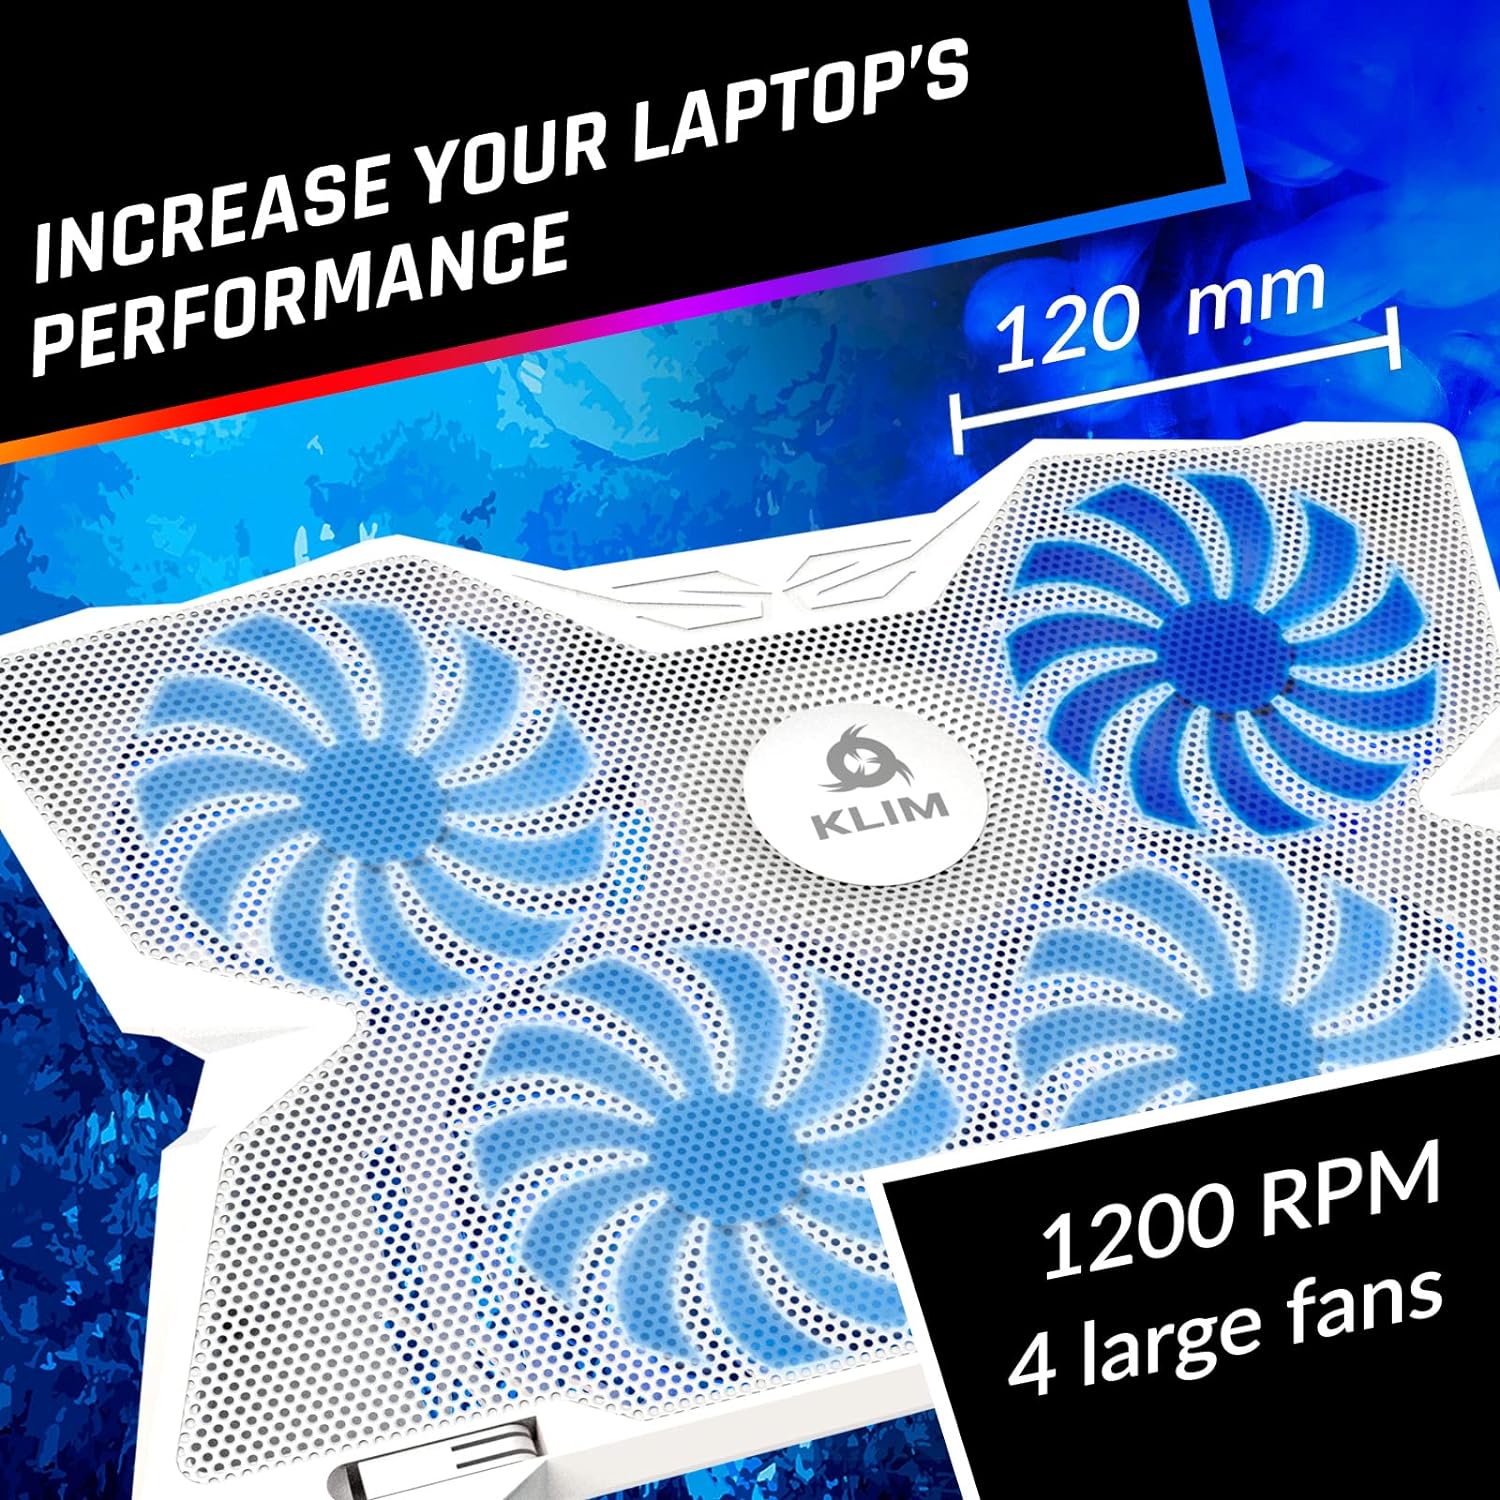 KLIM Wind - Laptop Cooling Pad - More Than 500 000 Units Sold - 2022 Version - The Most Powerful Rapid Action Cooling Fan - Laptop Stand with 4 Cooling Fans at 1200 RPM - USB Fan - PS5, PS4 (RGB)